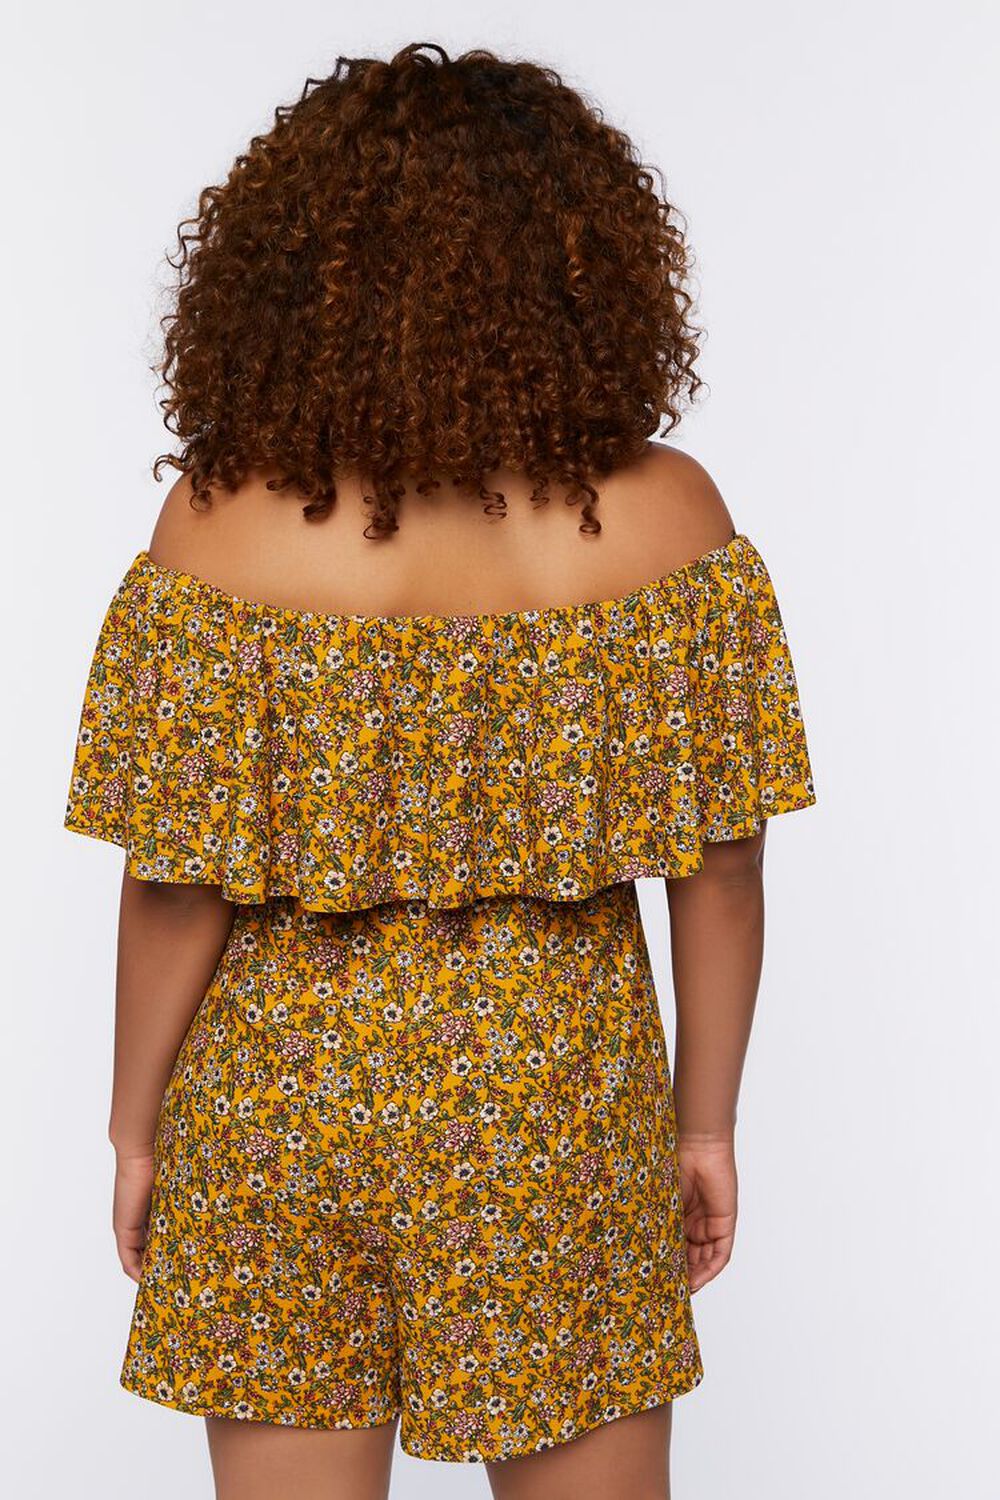 YELLOW/MULTI Plus Size Floral Off-the-Shoulder Romper, image 3